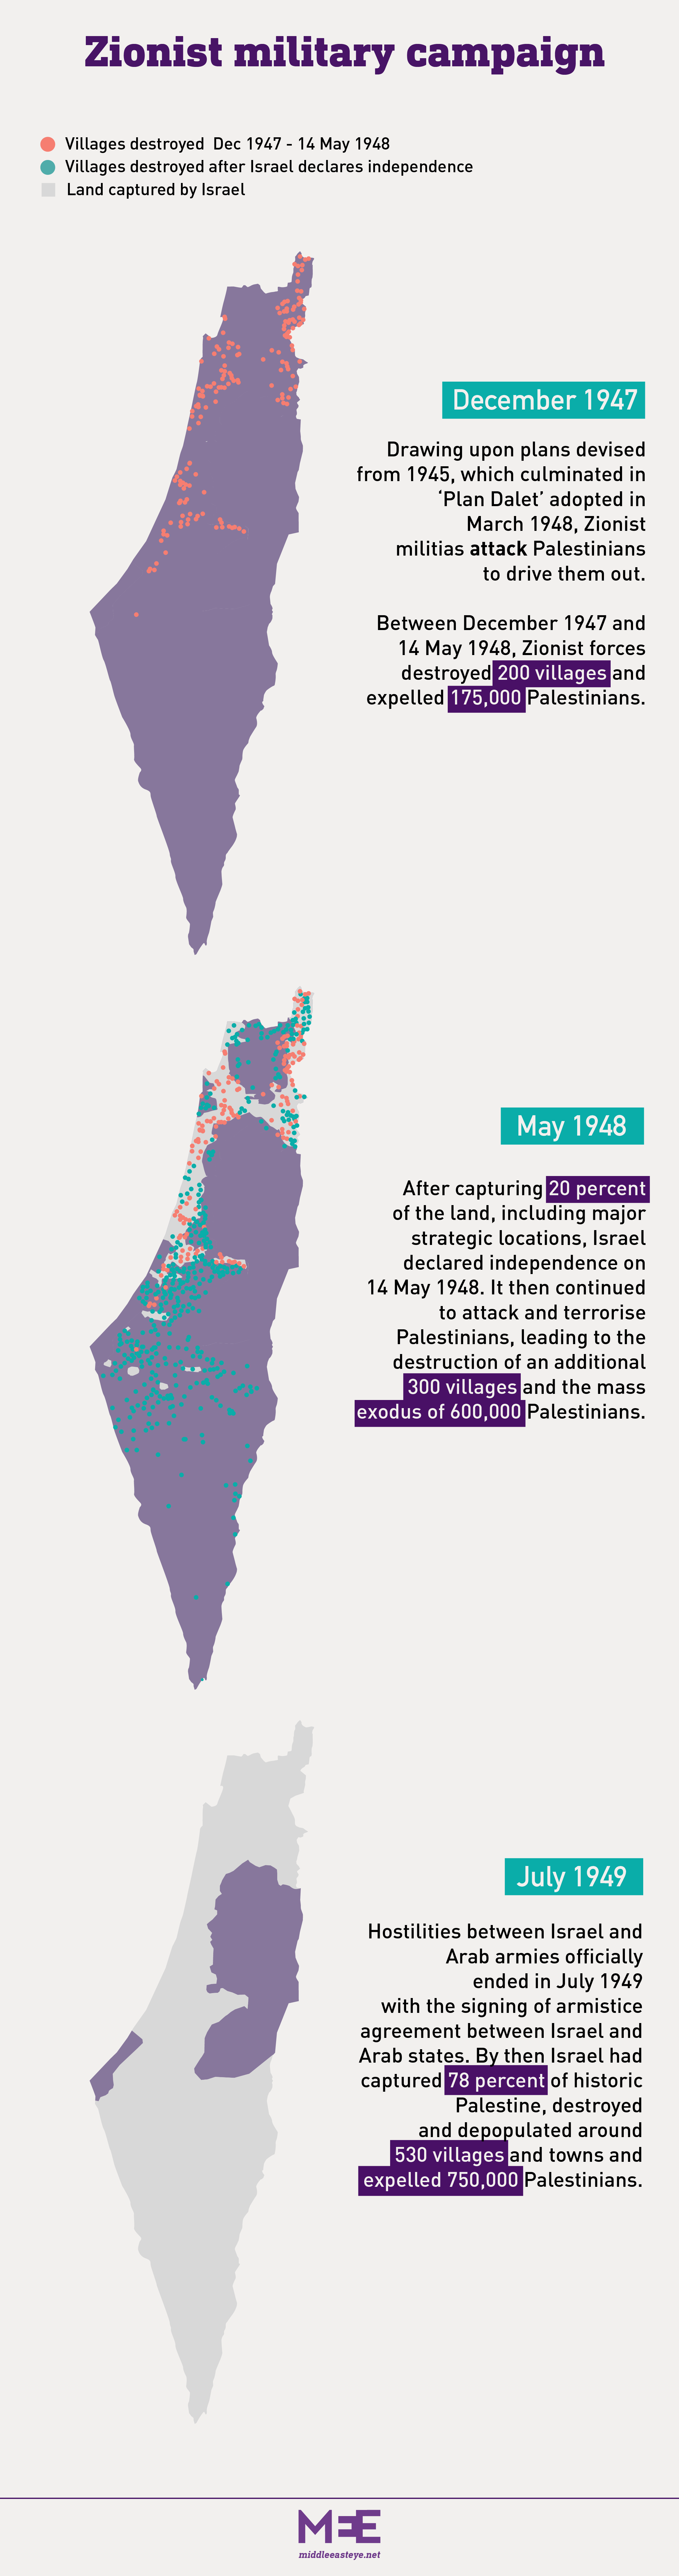 Zionist military campaign (MEE)